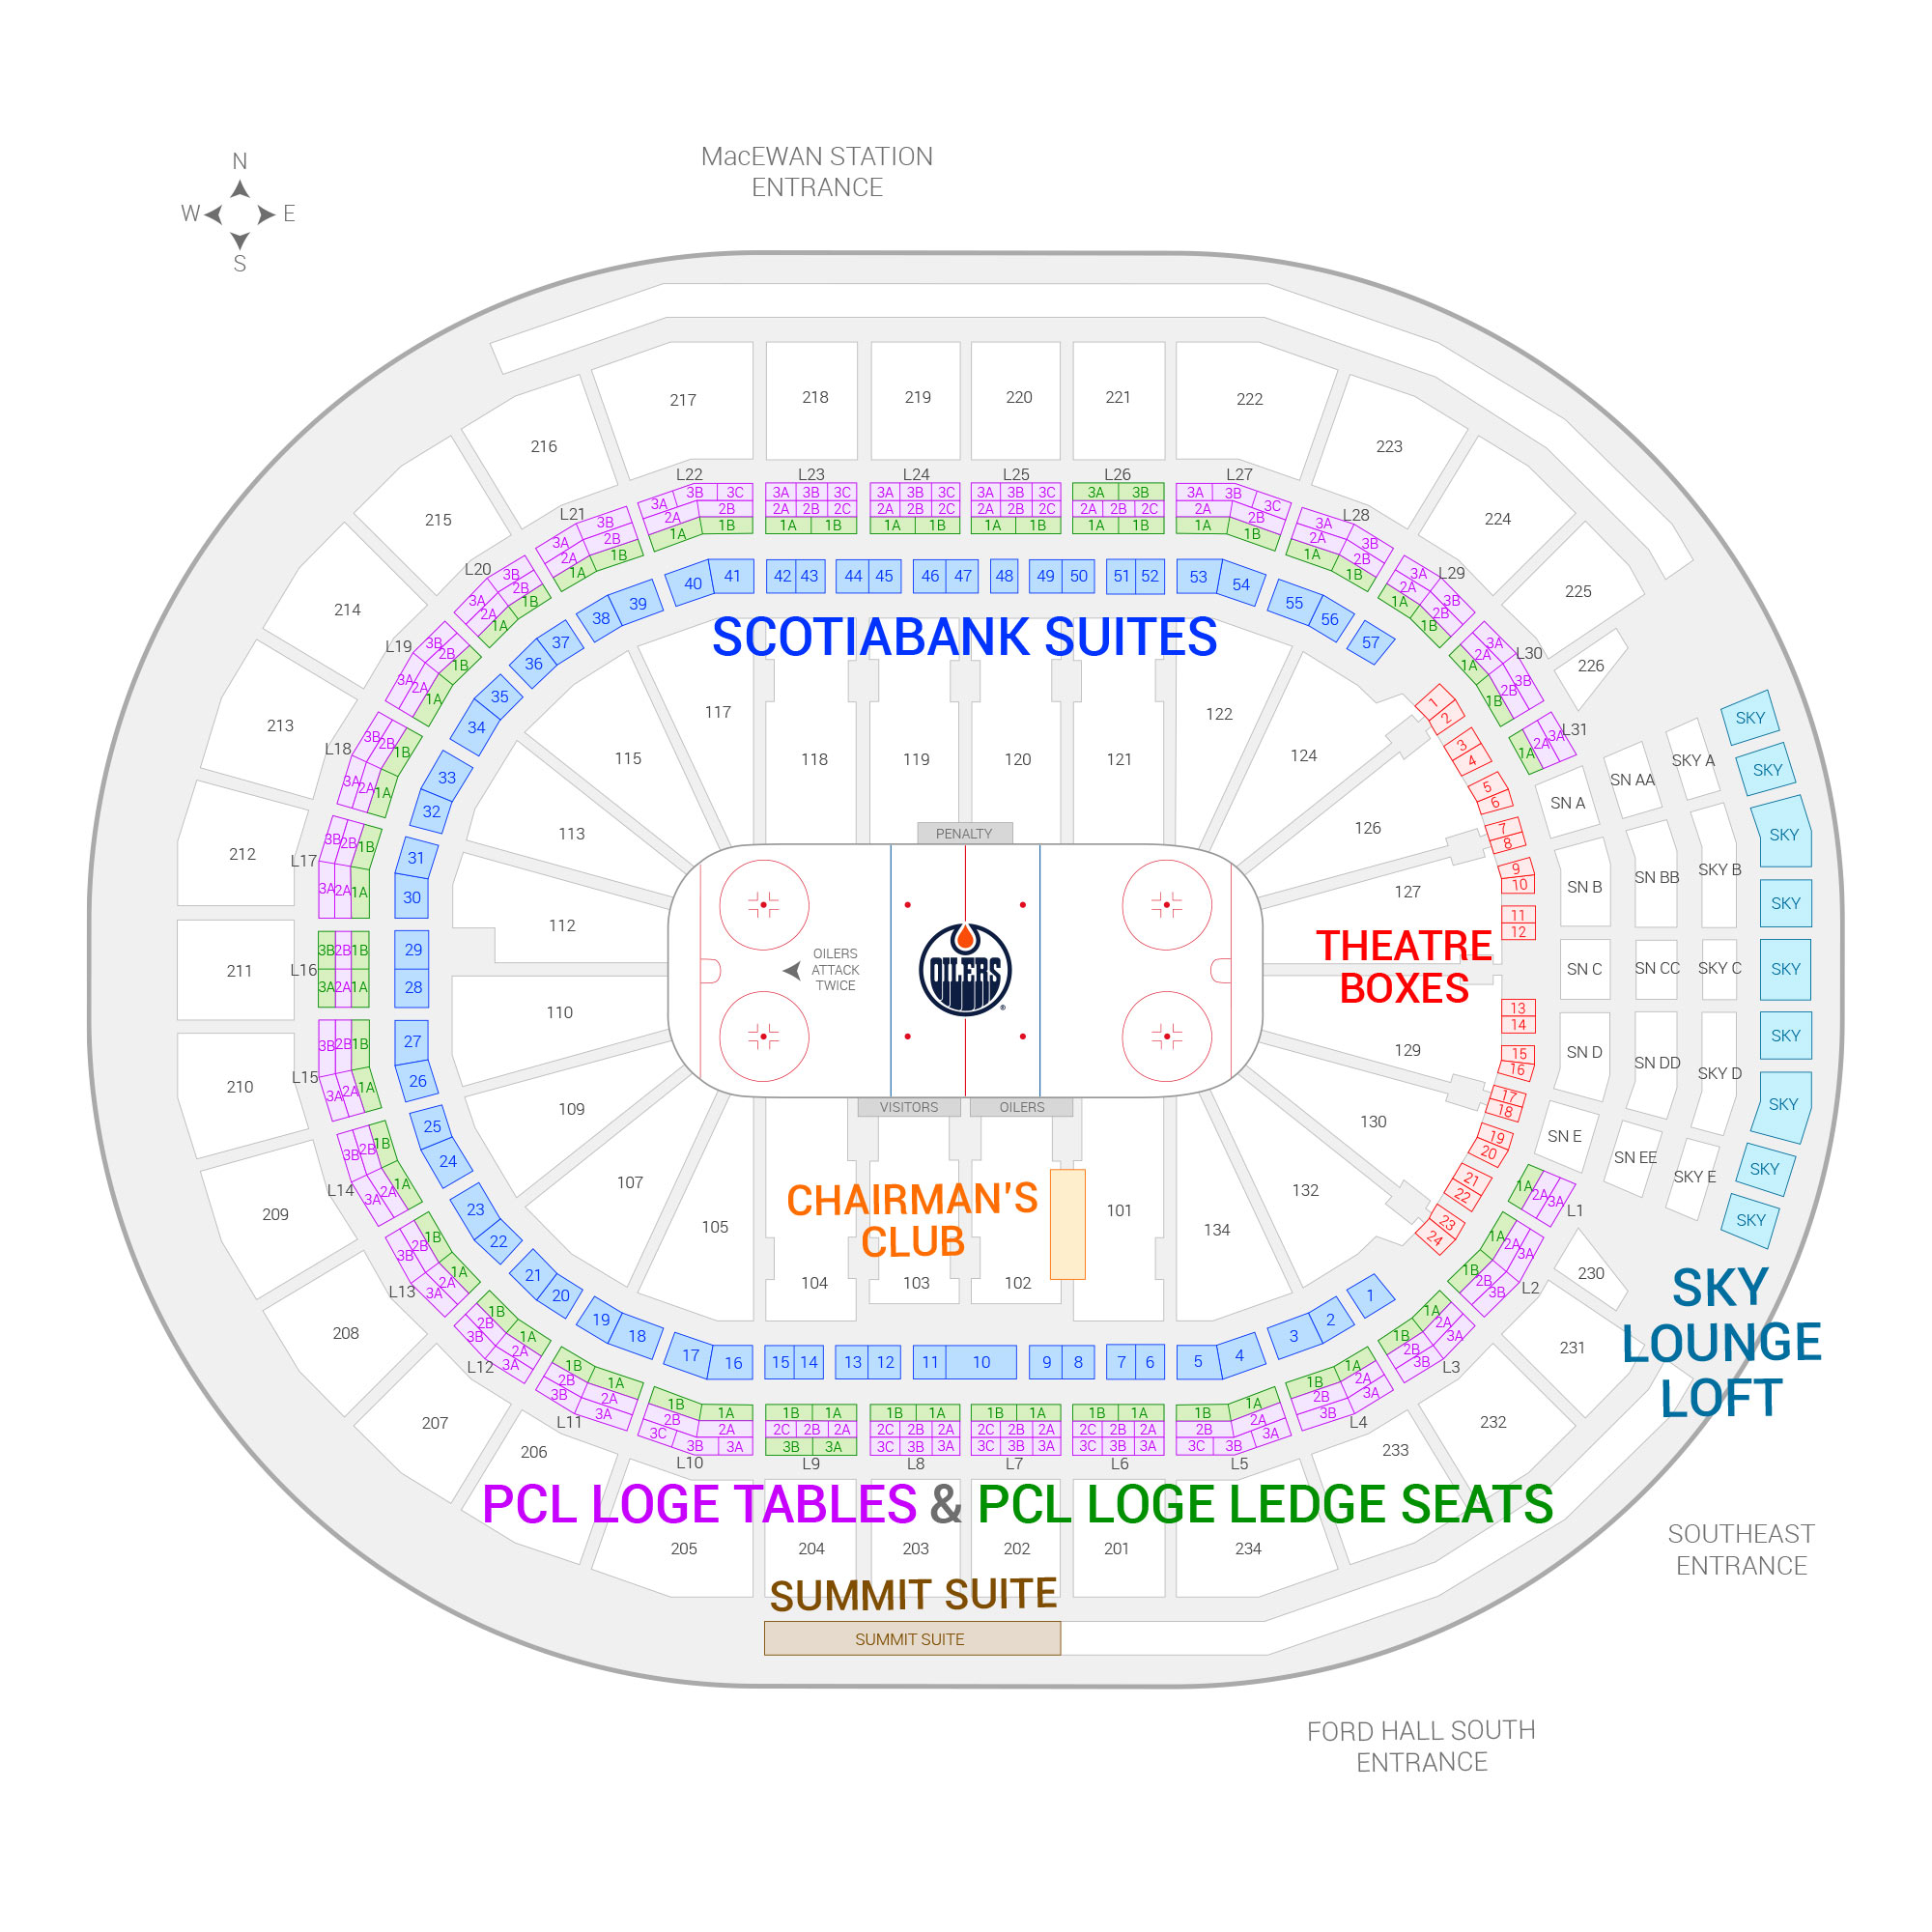 Rogers Place / Edmonton Oilers Suite Map and Seating Chart